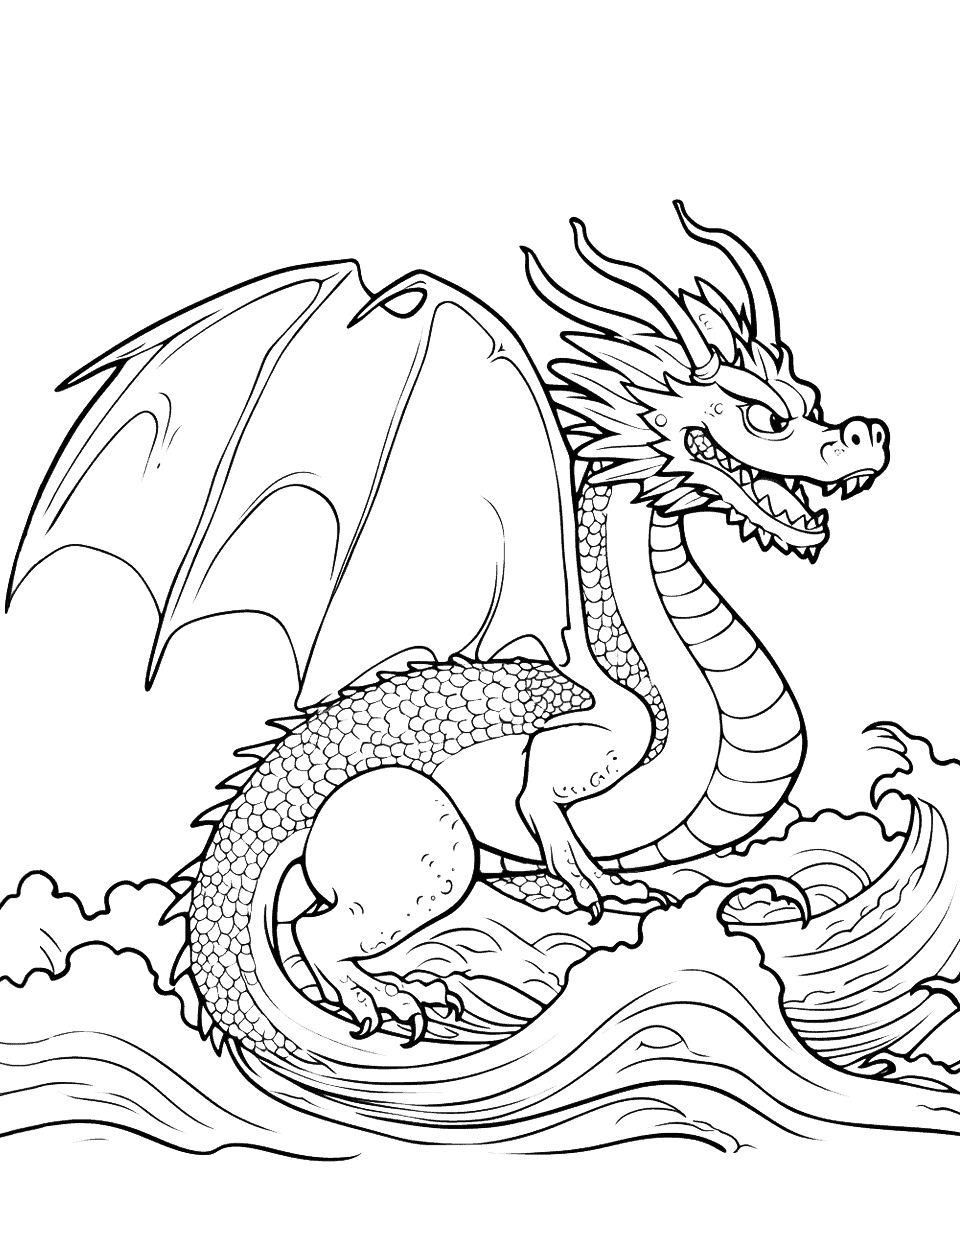 Seawing Dragon Coloring Page - A Seawing dragon, surfing a giant wave.